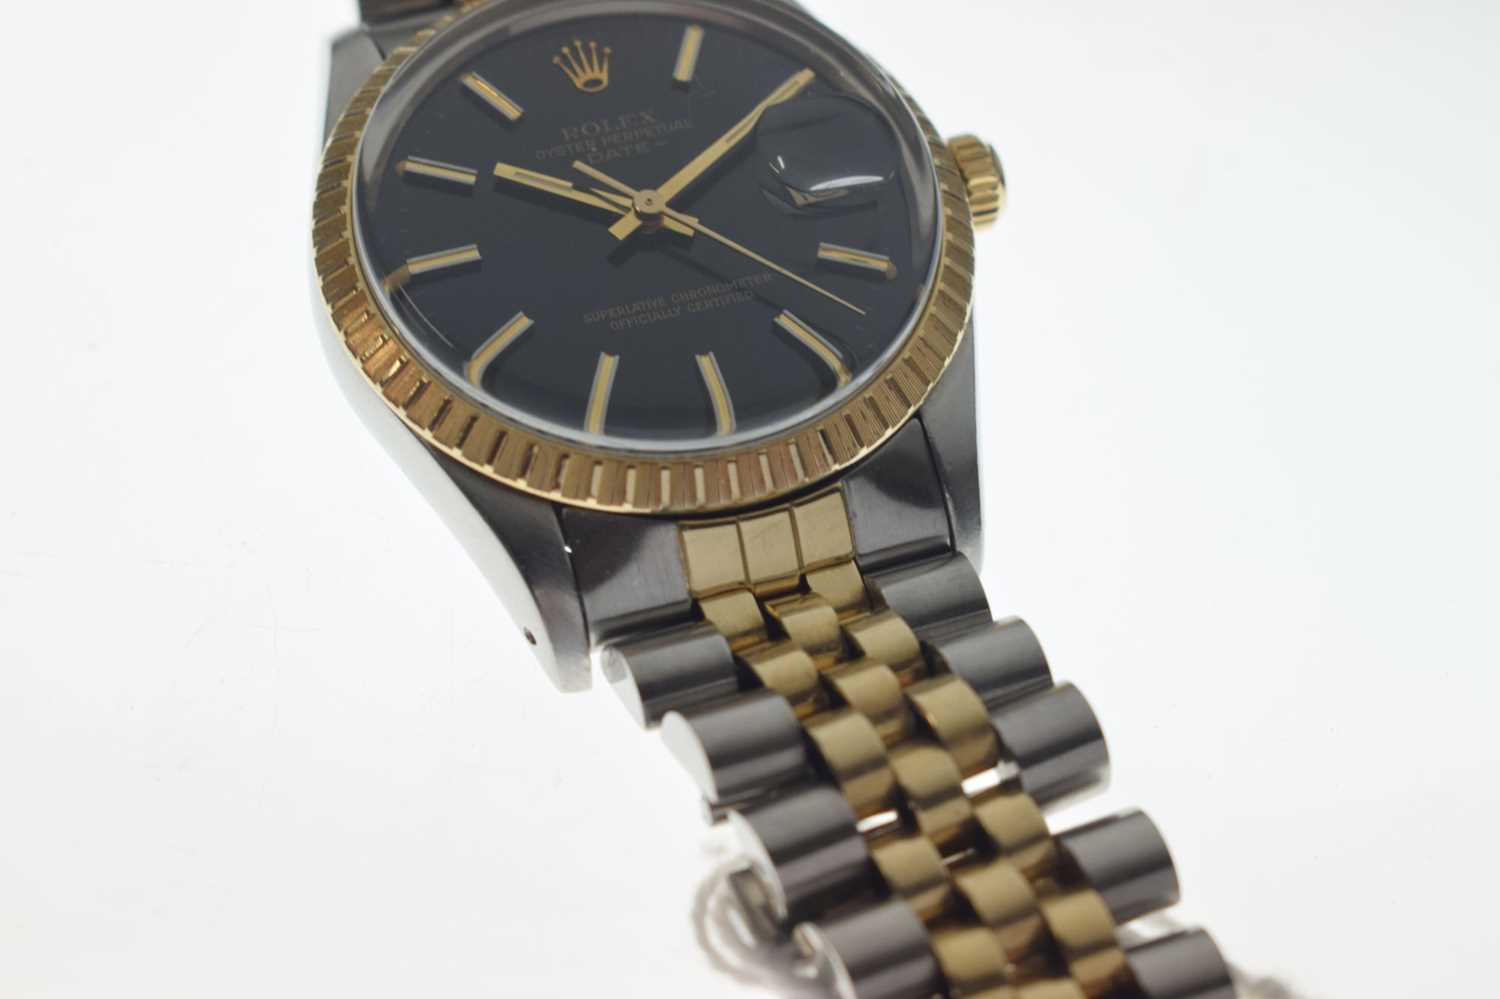 Rolex - Early 1980s Datejust Oyster Perpetual Superlative Chronometer - Image 6 of 16